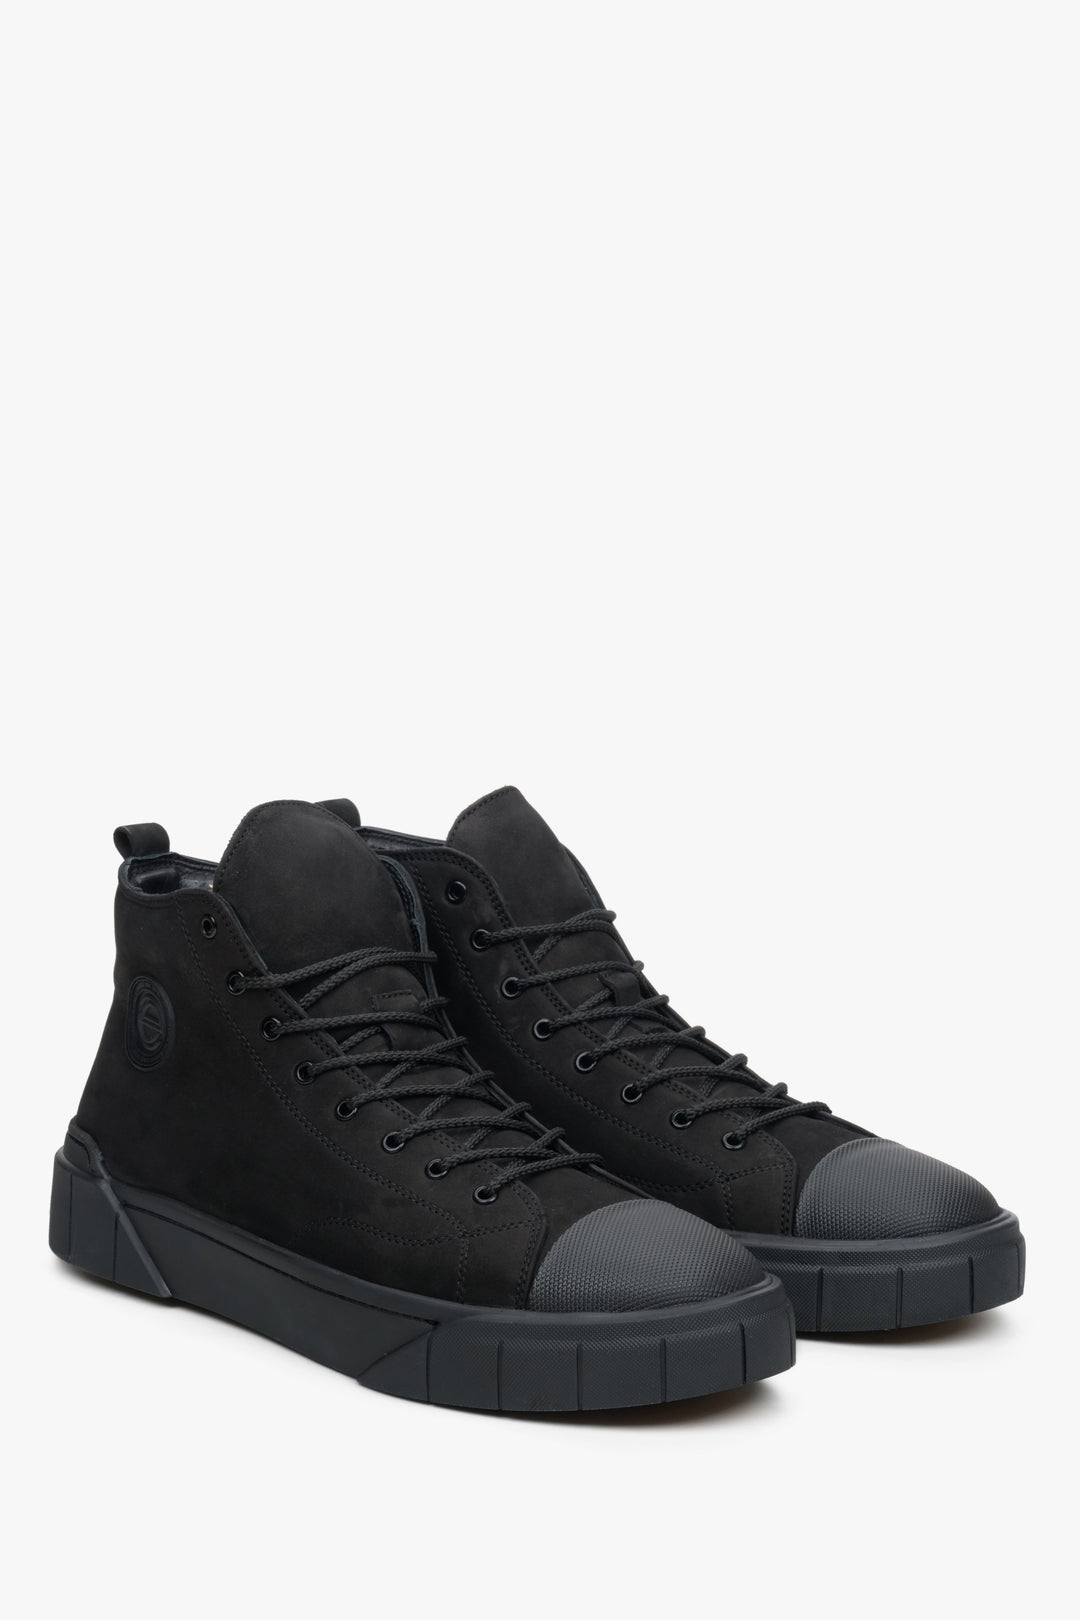 High-top men's winter sneakers made of black suede with fur lining